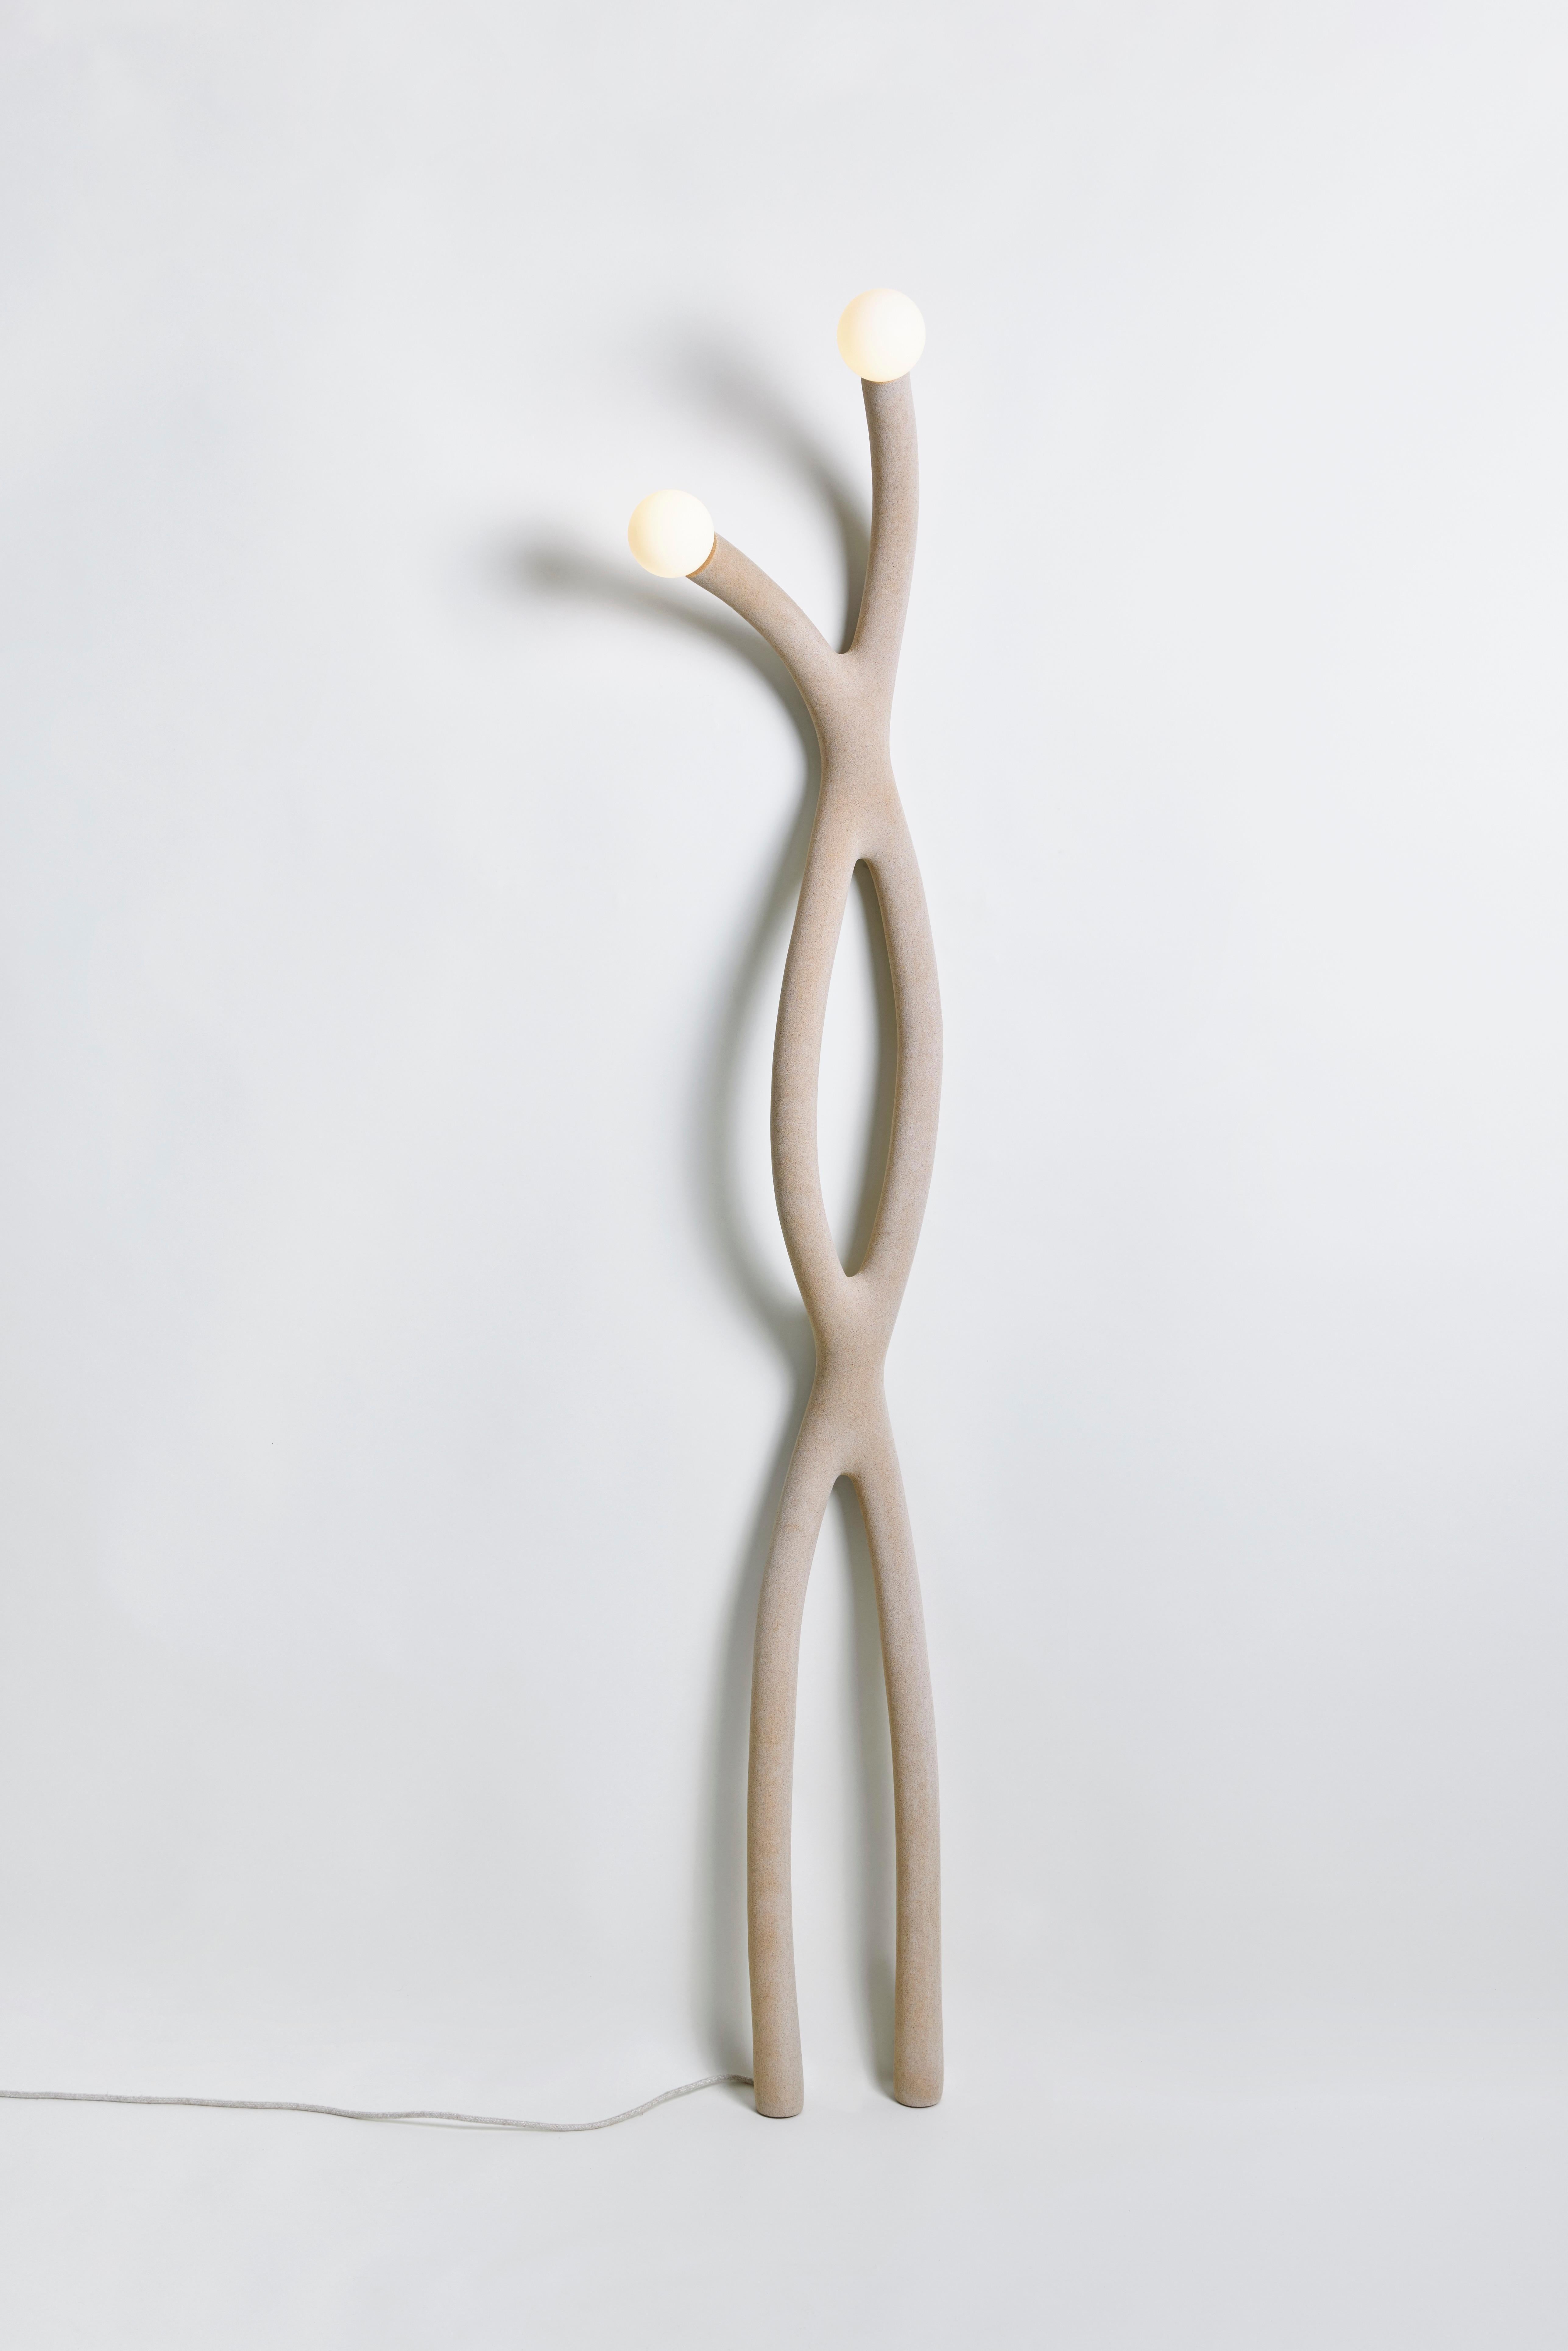 Native Object 06 Double Wall Light by Hot Wire Extensions
Dimensions: D 30 x W 34 x H 197 cm 
Materials: Waste nylon powder, locally sourced beige sand, copper pipe, hand-blown glass bulbs, natural cotton electrical cord.
13 kg

Different sands and